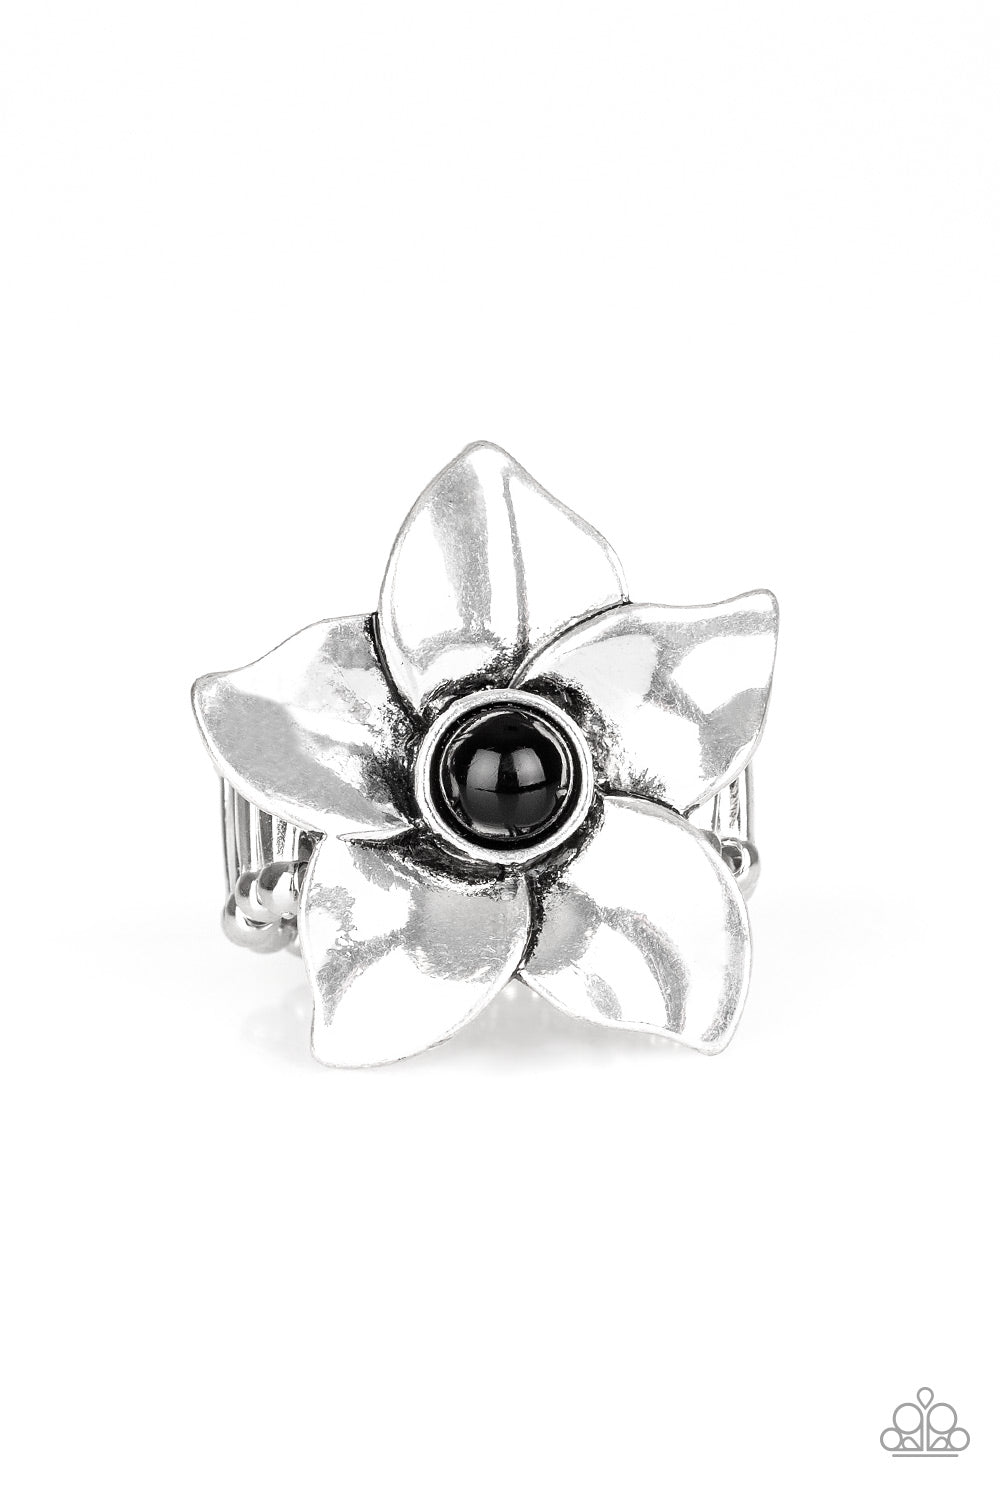 Ask For Flowers Black Ring - Paparazzi Accessories  Glistening silver petals fold around a shiny black beaded center, creating a whimsical flower atop the finger. Features a stretchy band for a flexible fit.  All Paparazzi Accessories are lead free and nickel free!  Sold as one individual ring.